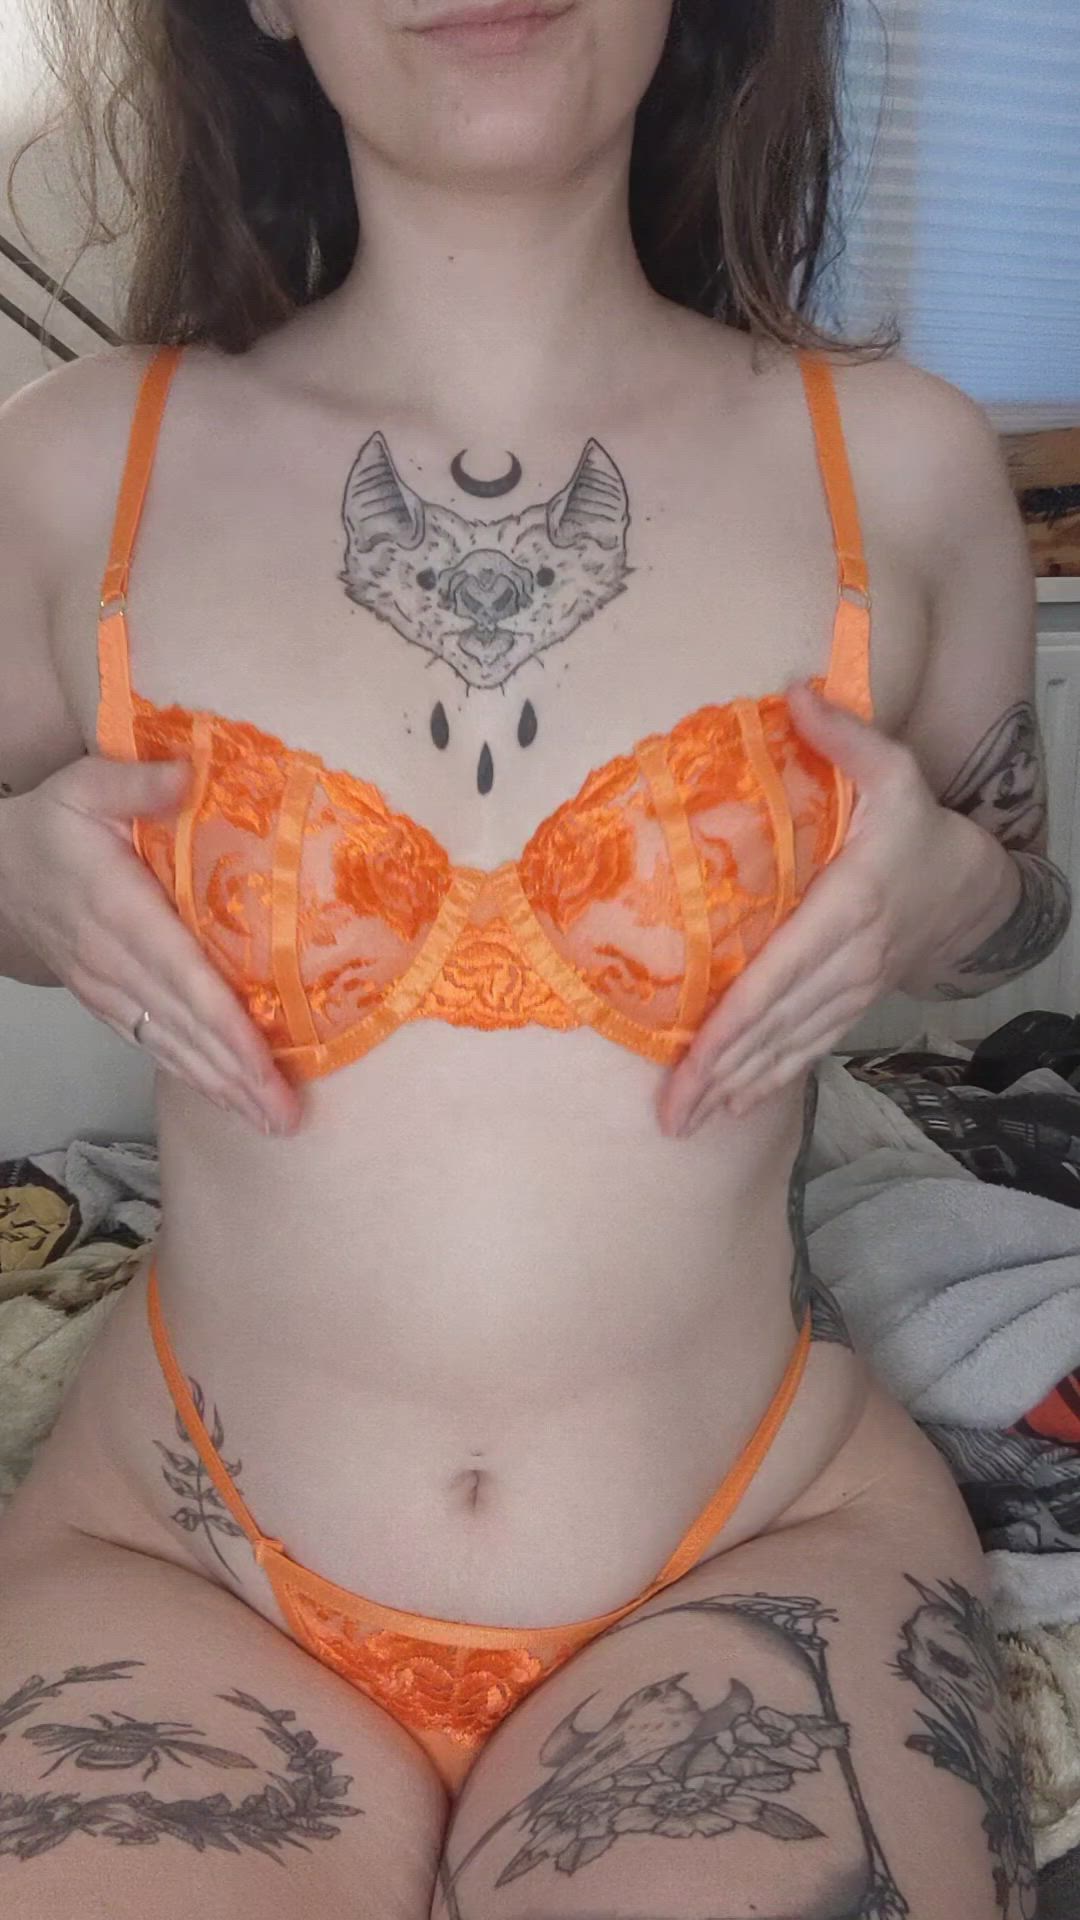 Amateur porn video with onlyfans model jennadams <strong>@jennsjuicycake</strong>